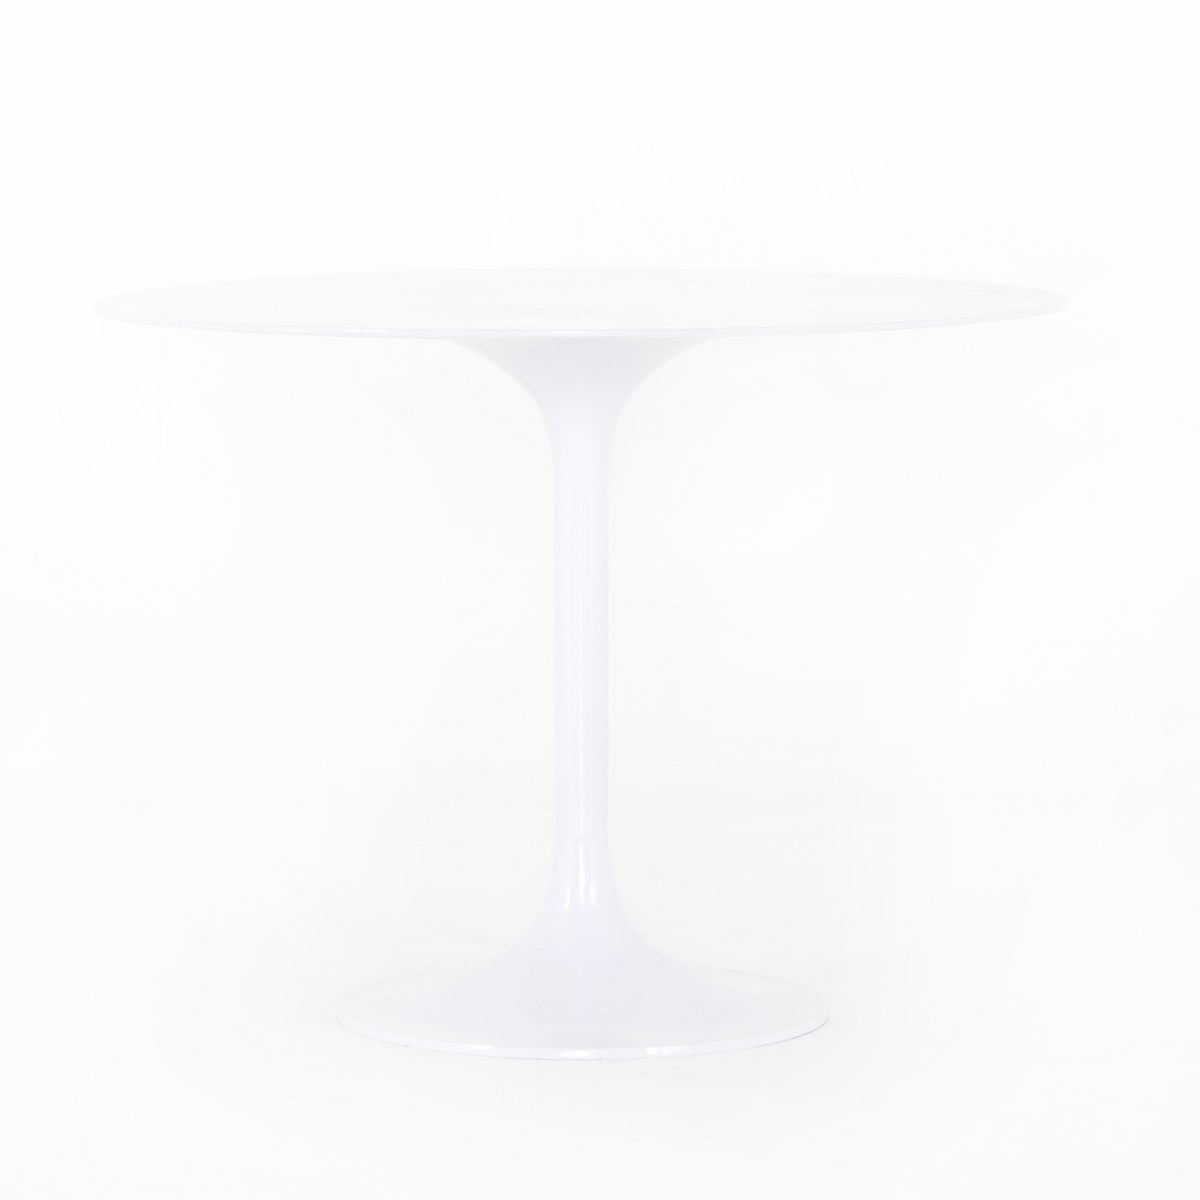 Load image into Gallery viewer, Simone Bistro Table WhiteTable Four Hands  White   Four Hands, Burke Decor, Mid Century Modern Furniture, Old Bones Furniture Company, Old Bones Co, Modern Mid Century, Designer Furniture, https://www.oldbonesco.com/
